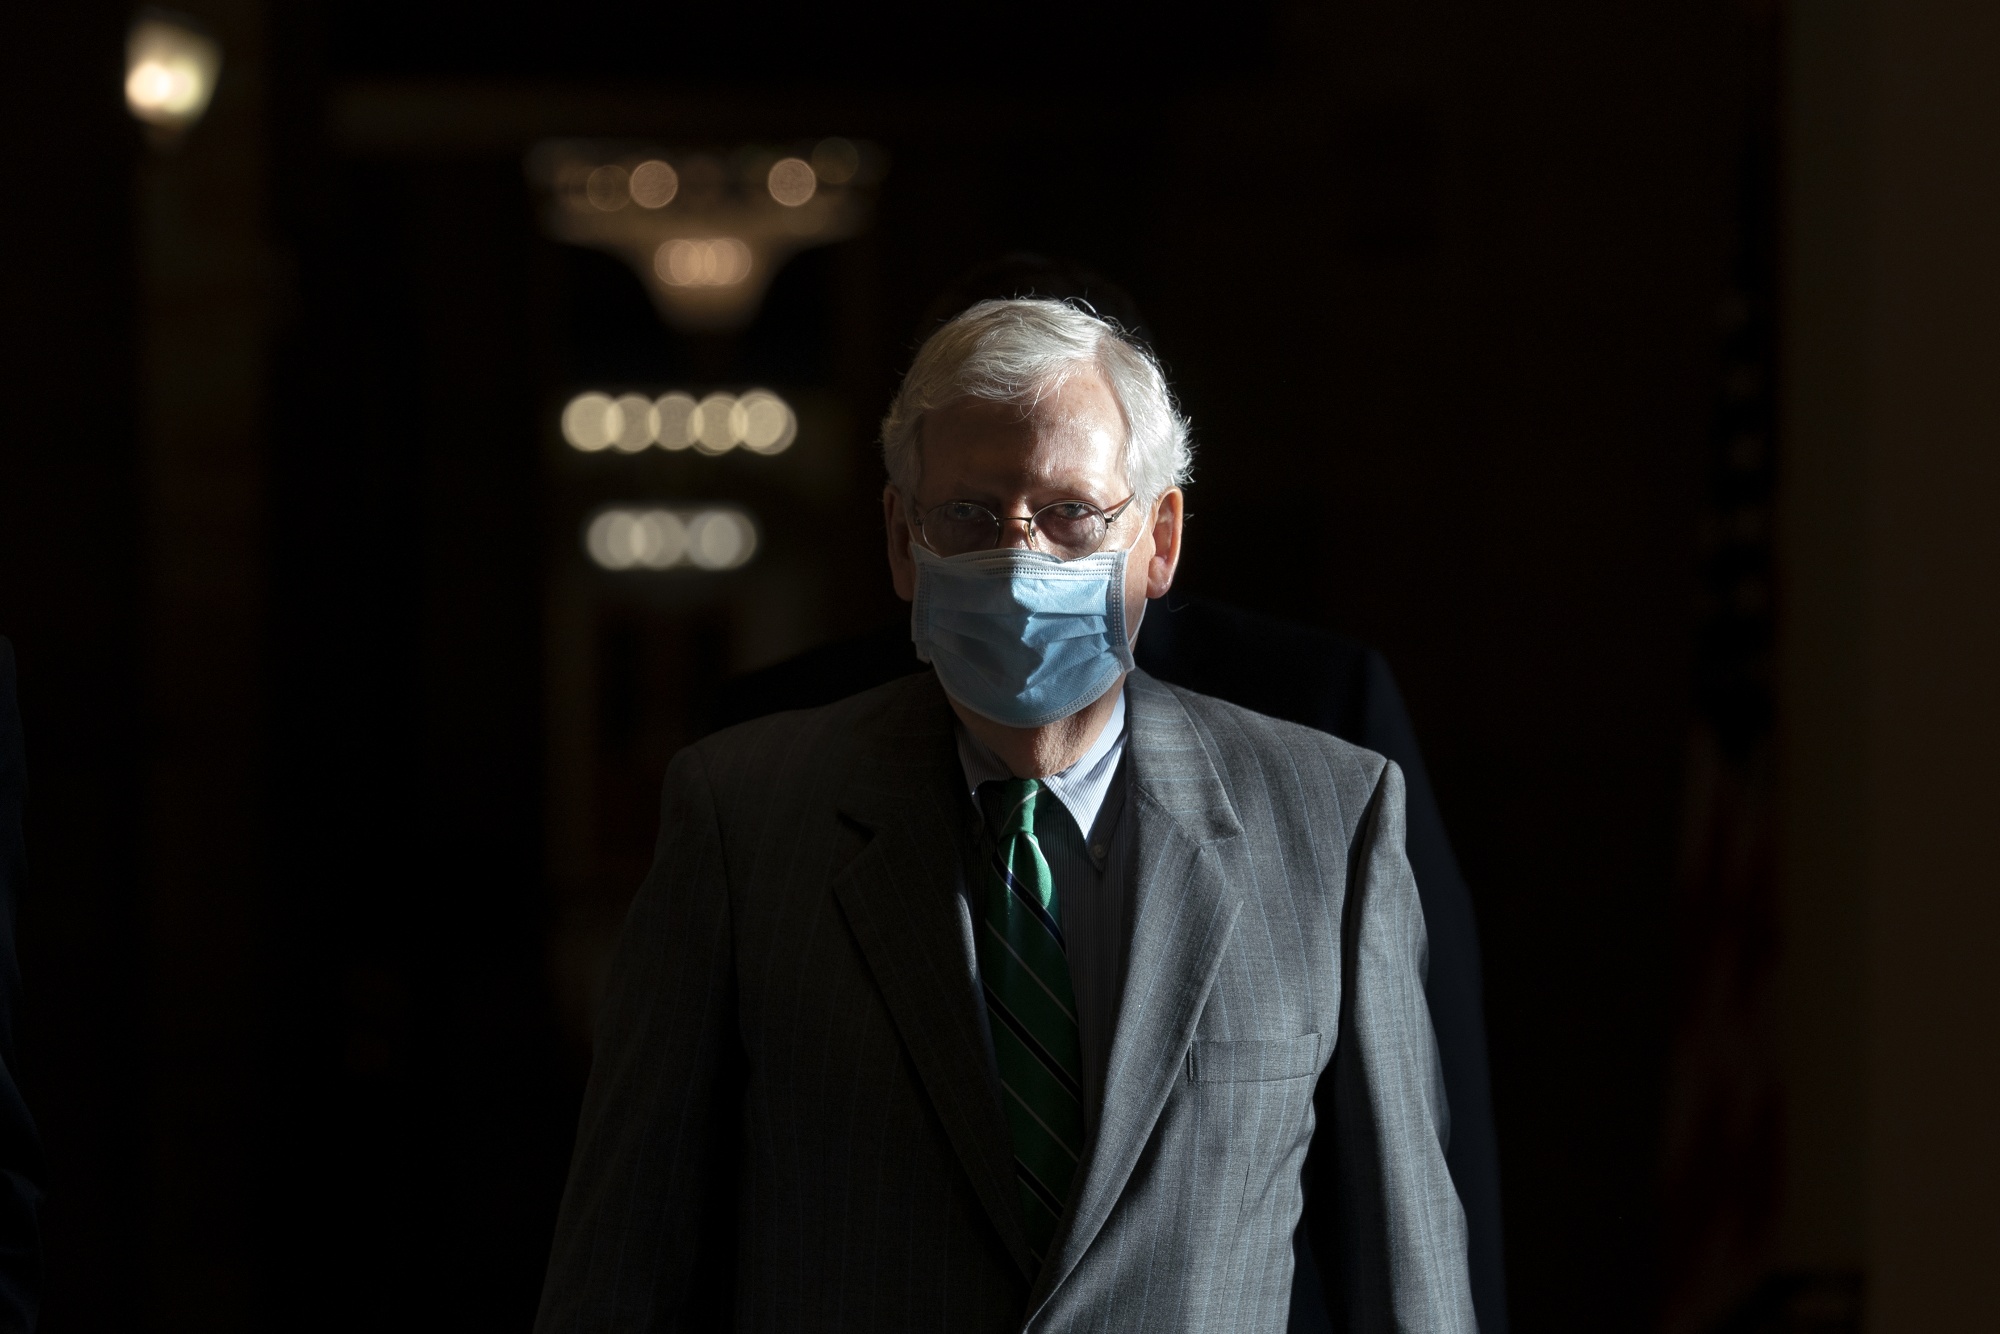 Mitch McConnell walks to the Senate Floor in Washington D.C., on Sept. 8.